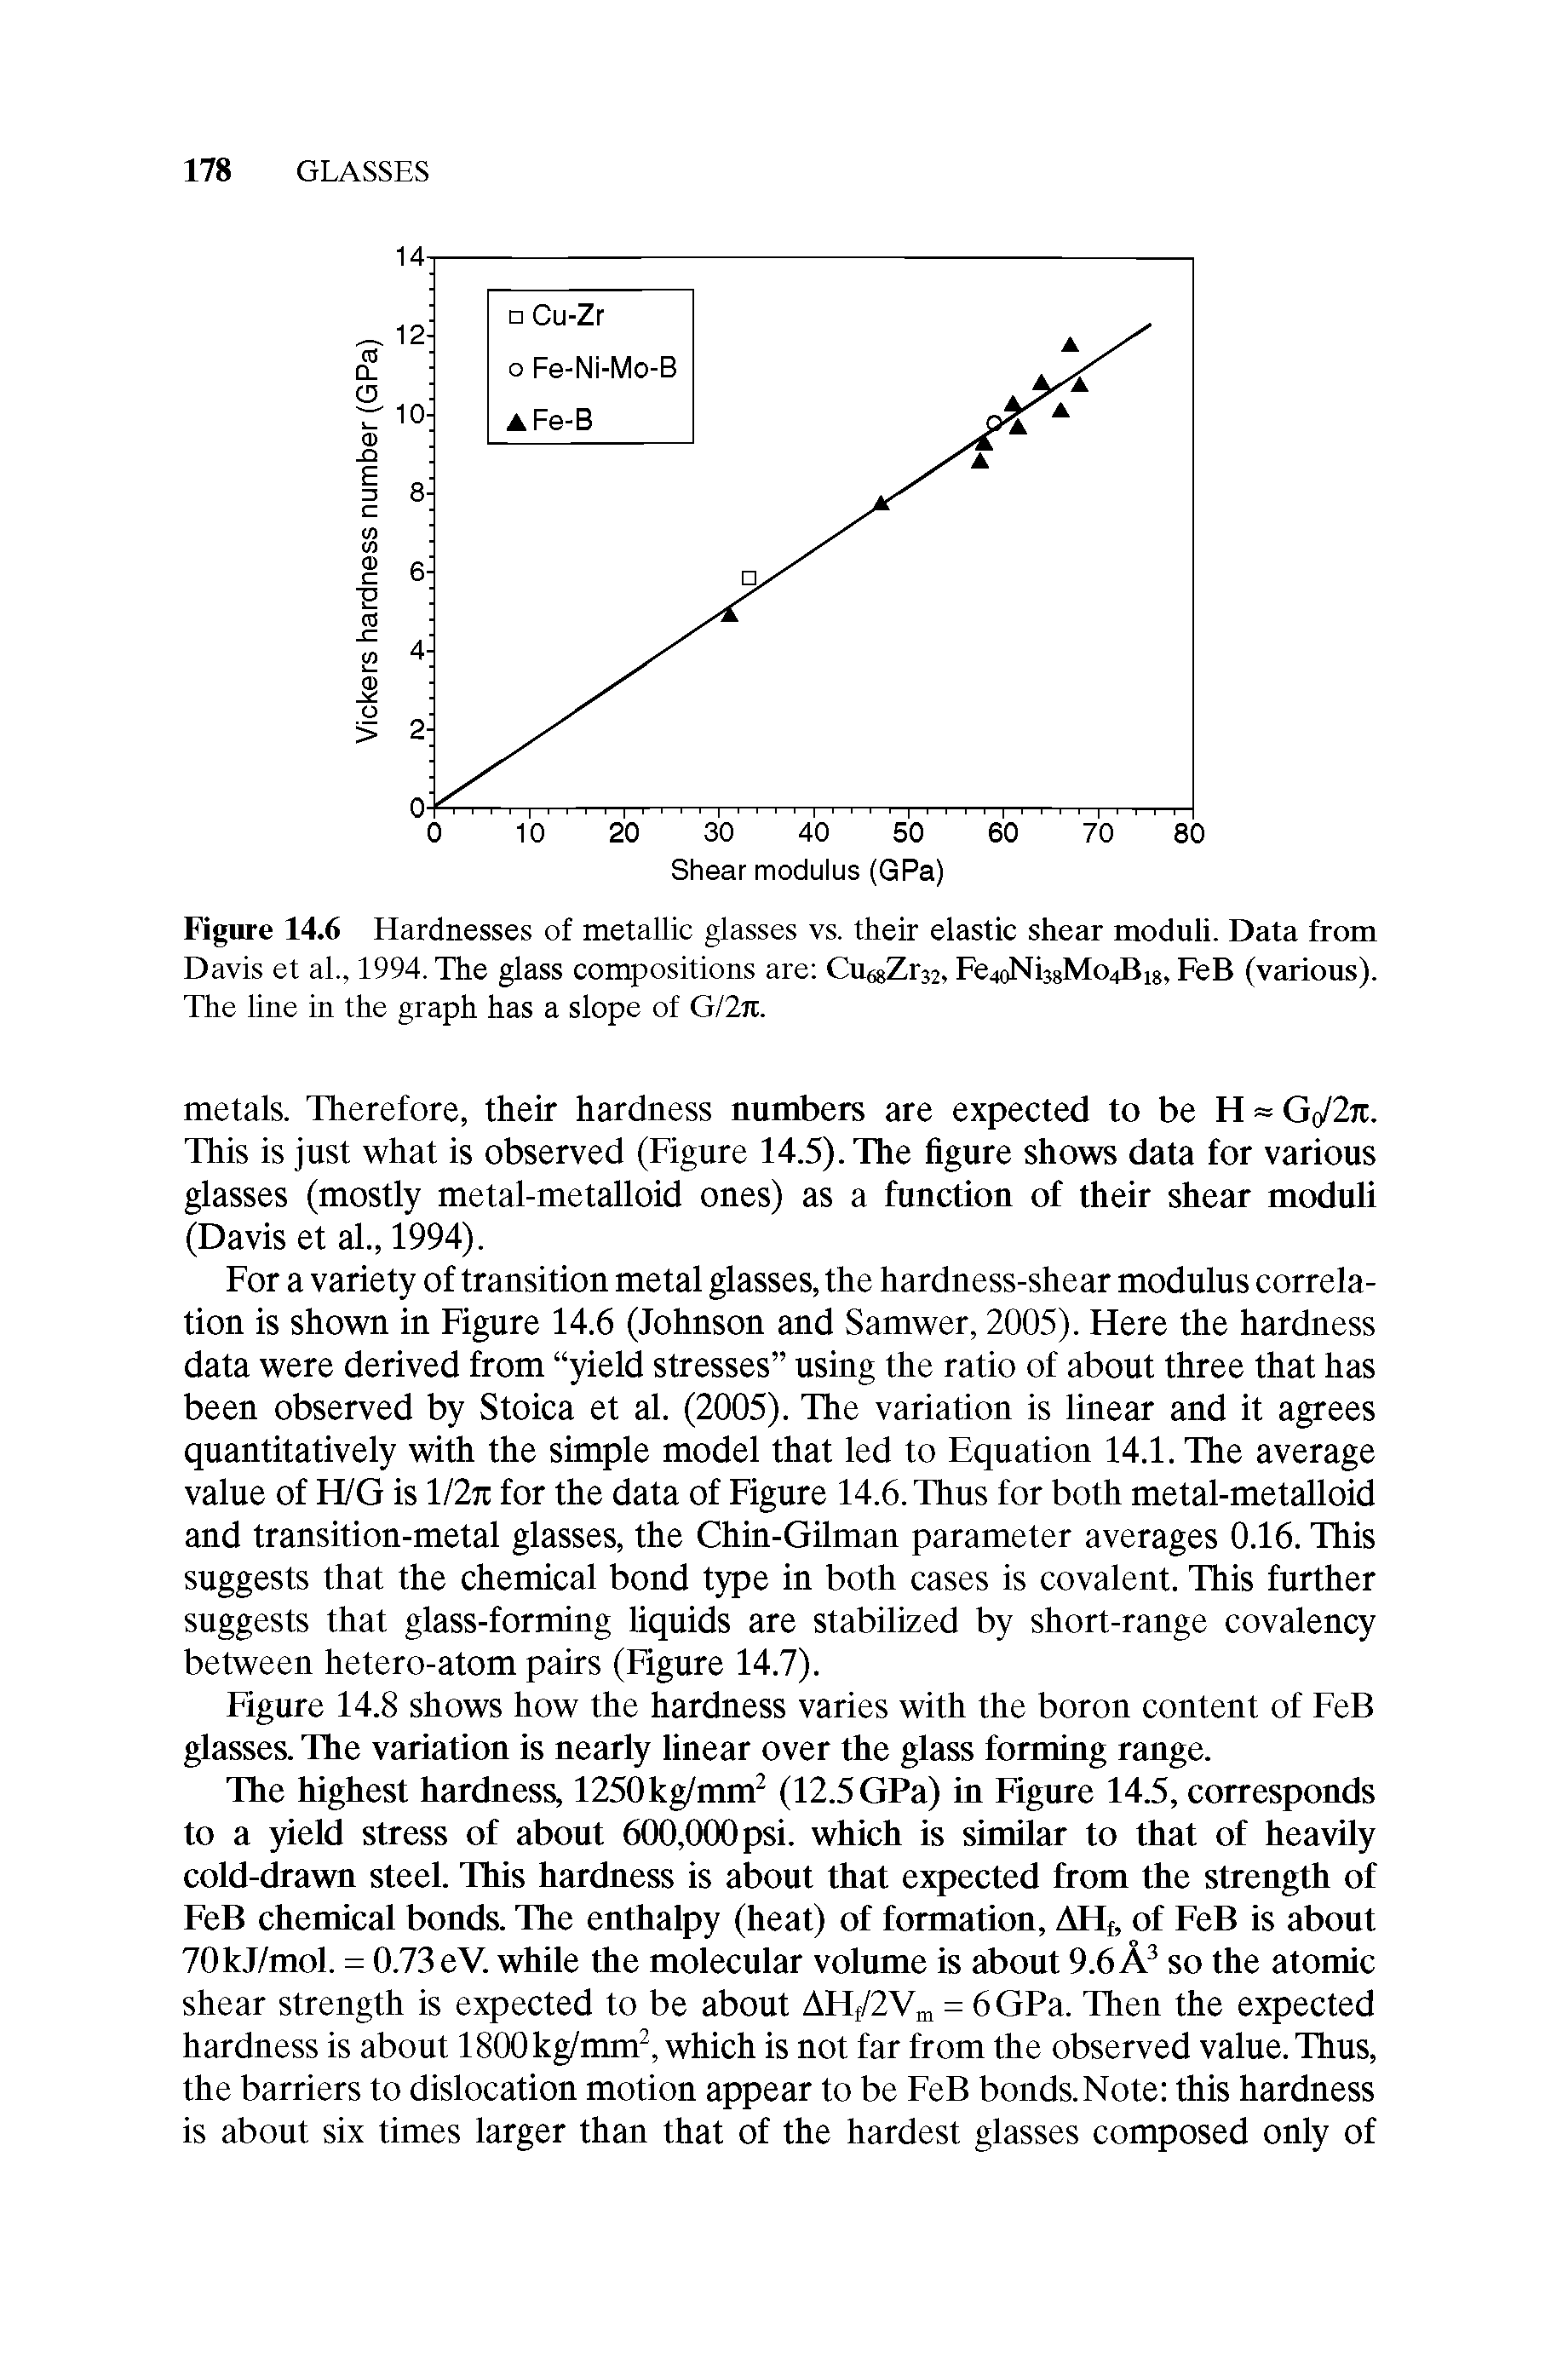 Figure 14.6 Hardnesses of metallic glasses vs. their elastic shear moduli. Data from Davis et al., 1994. The glass compositions are Cu68Zr32, Fe4oNi38Mo4Bi8, FeB (various). The line in the graph has a slope of G/2jl...